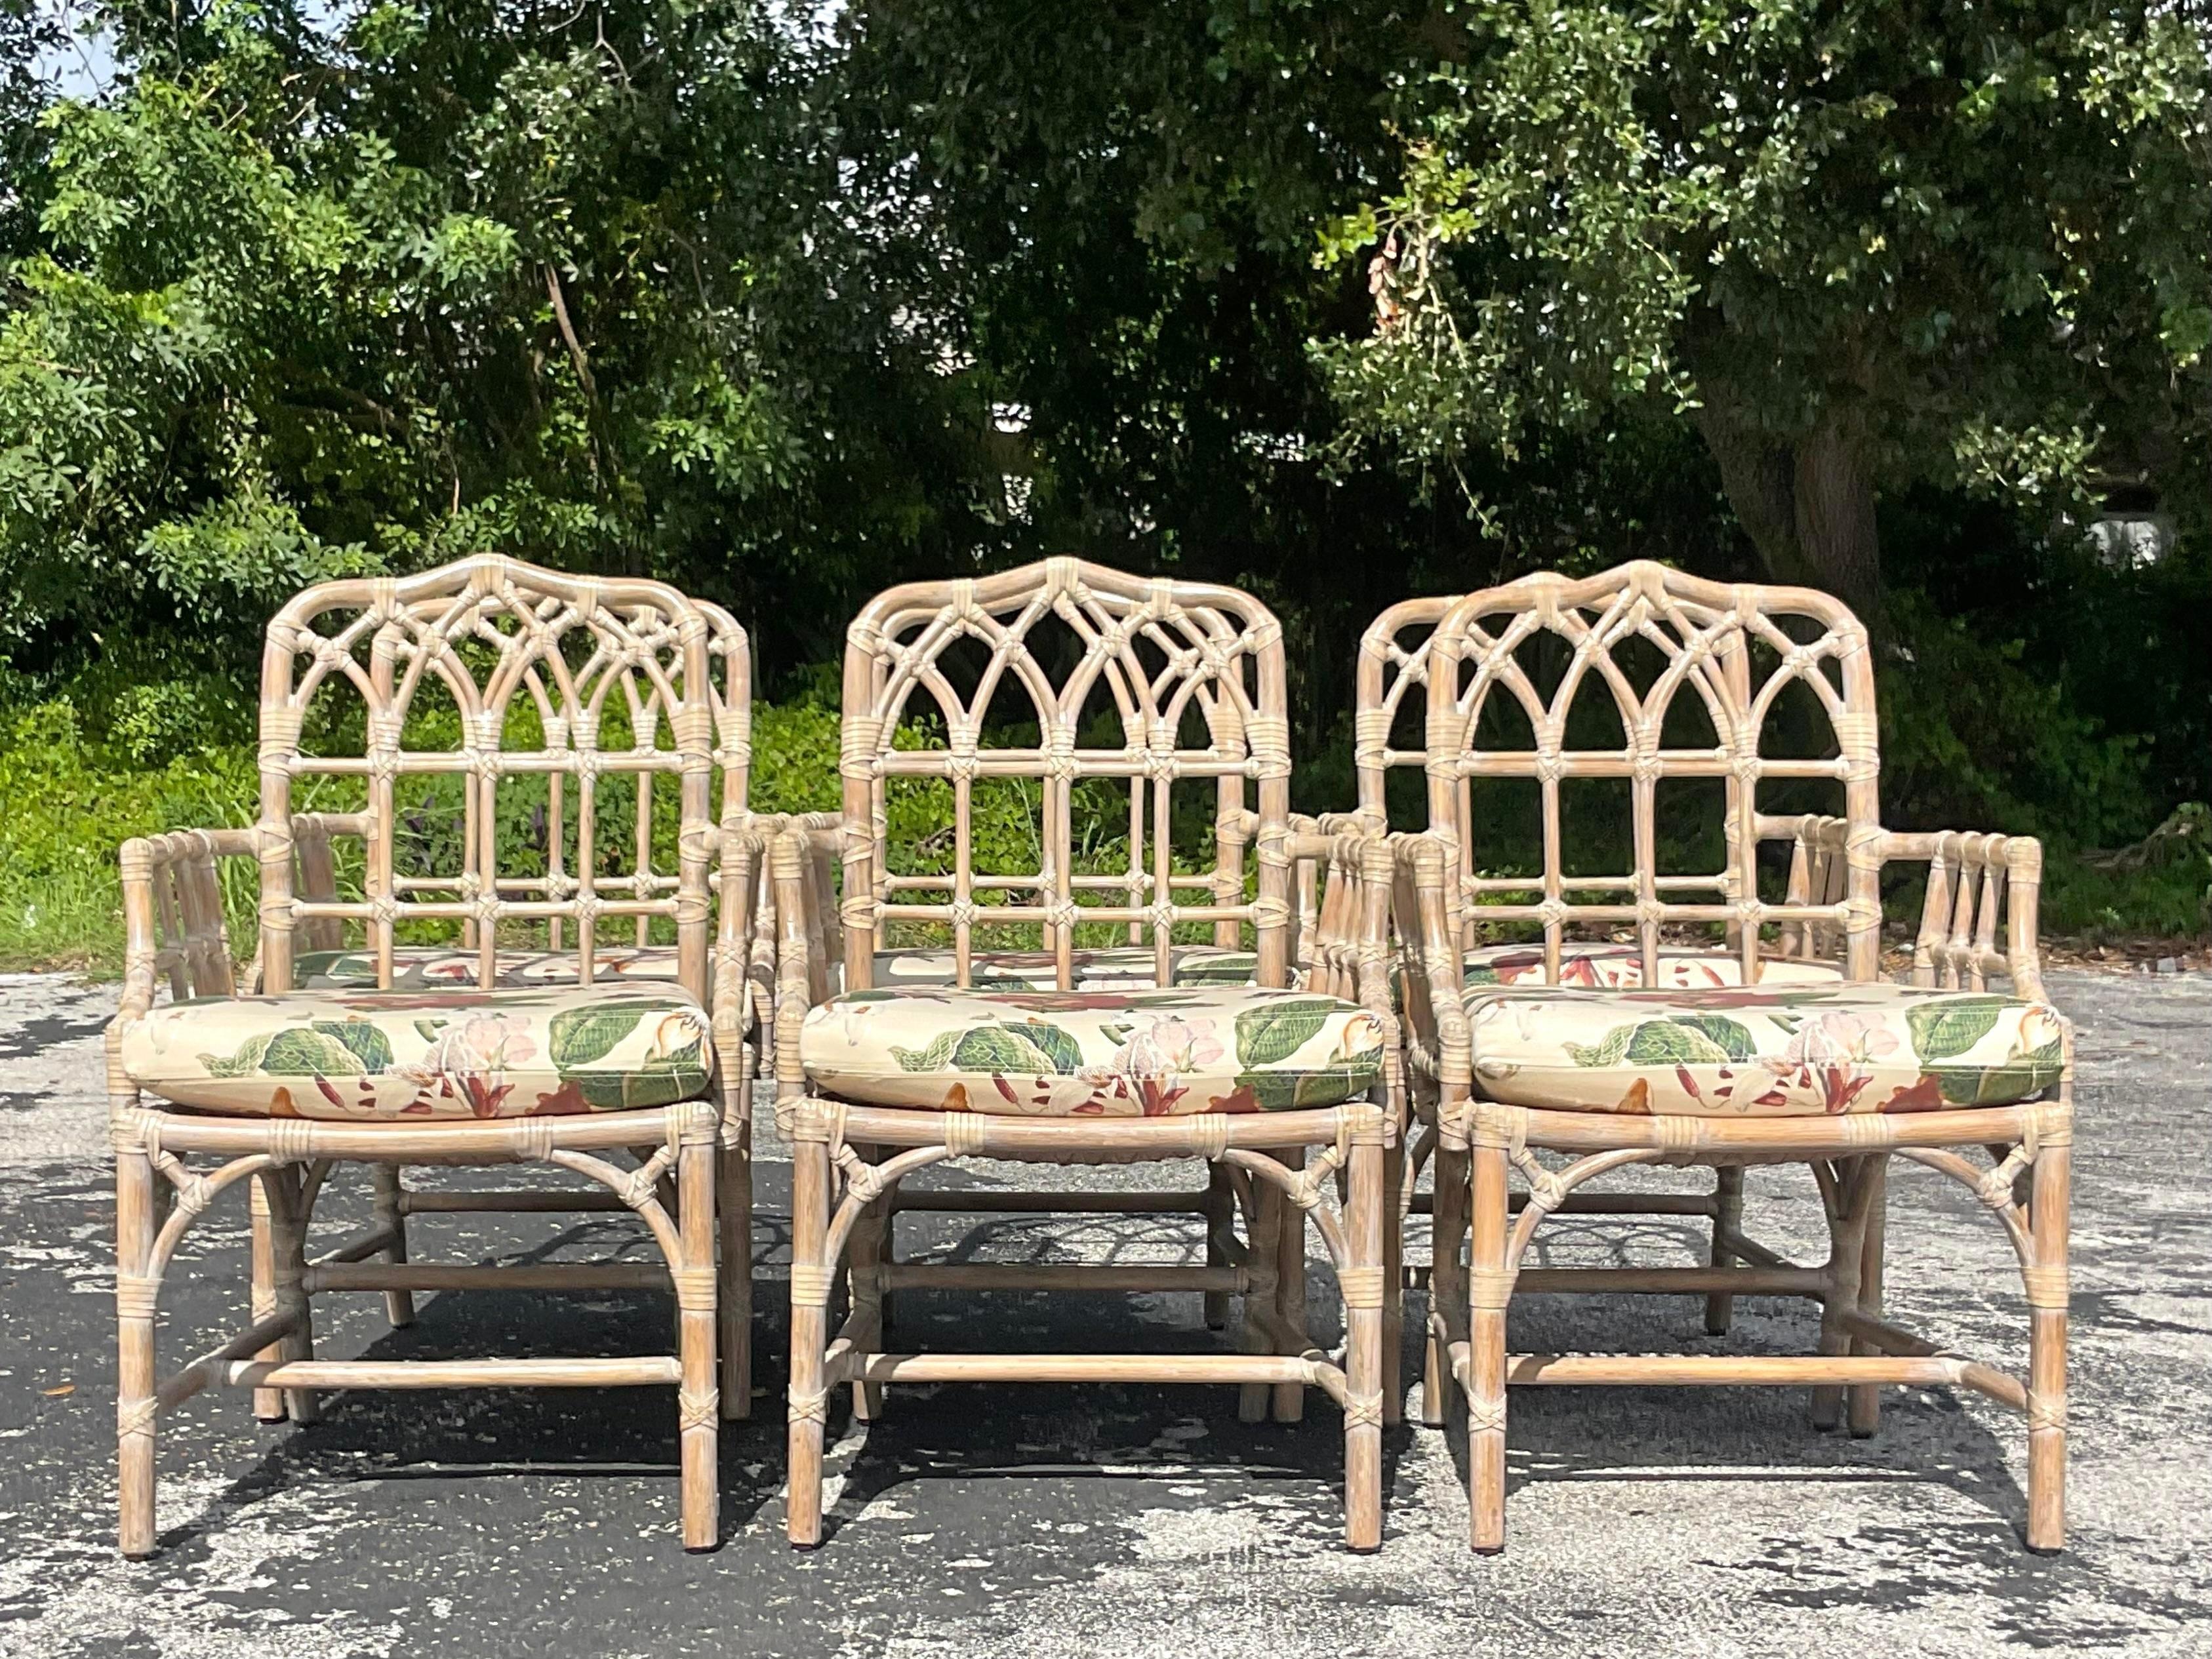 A fantastic set of 6 vintage Coastal dining chairs. Made by the iconic McGuire group and tagged on the bottom. Beautiful Cathedral design with a cerused finish. Acquired from a Palm Beach estate.